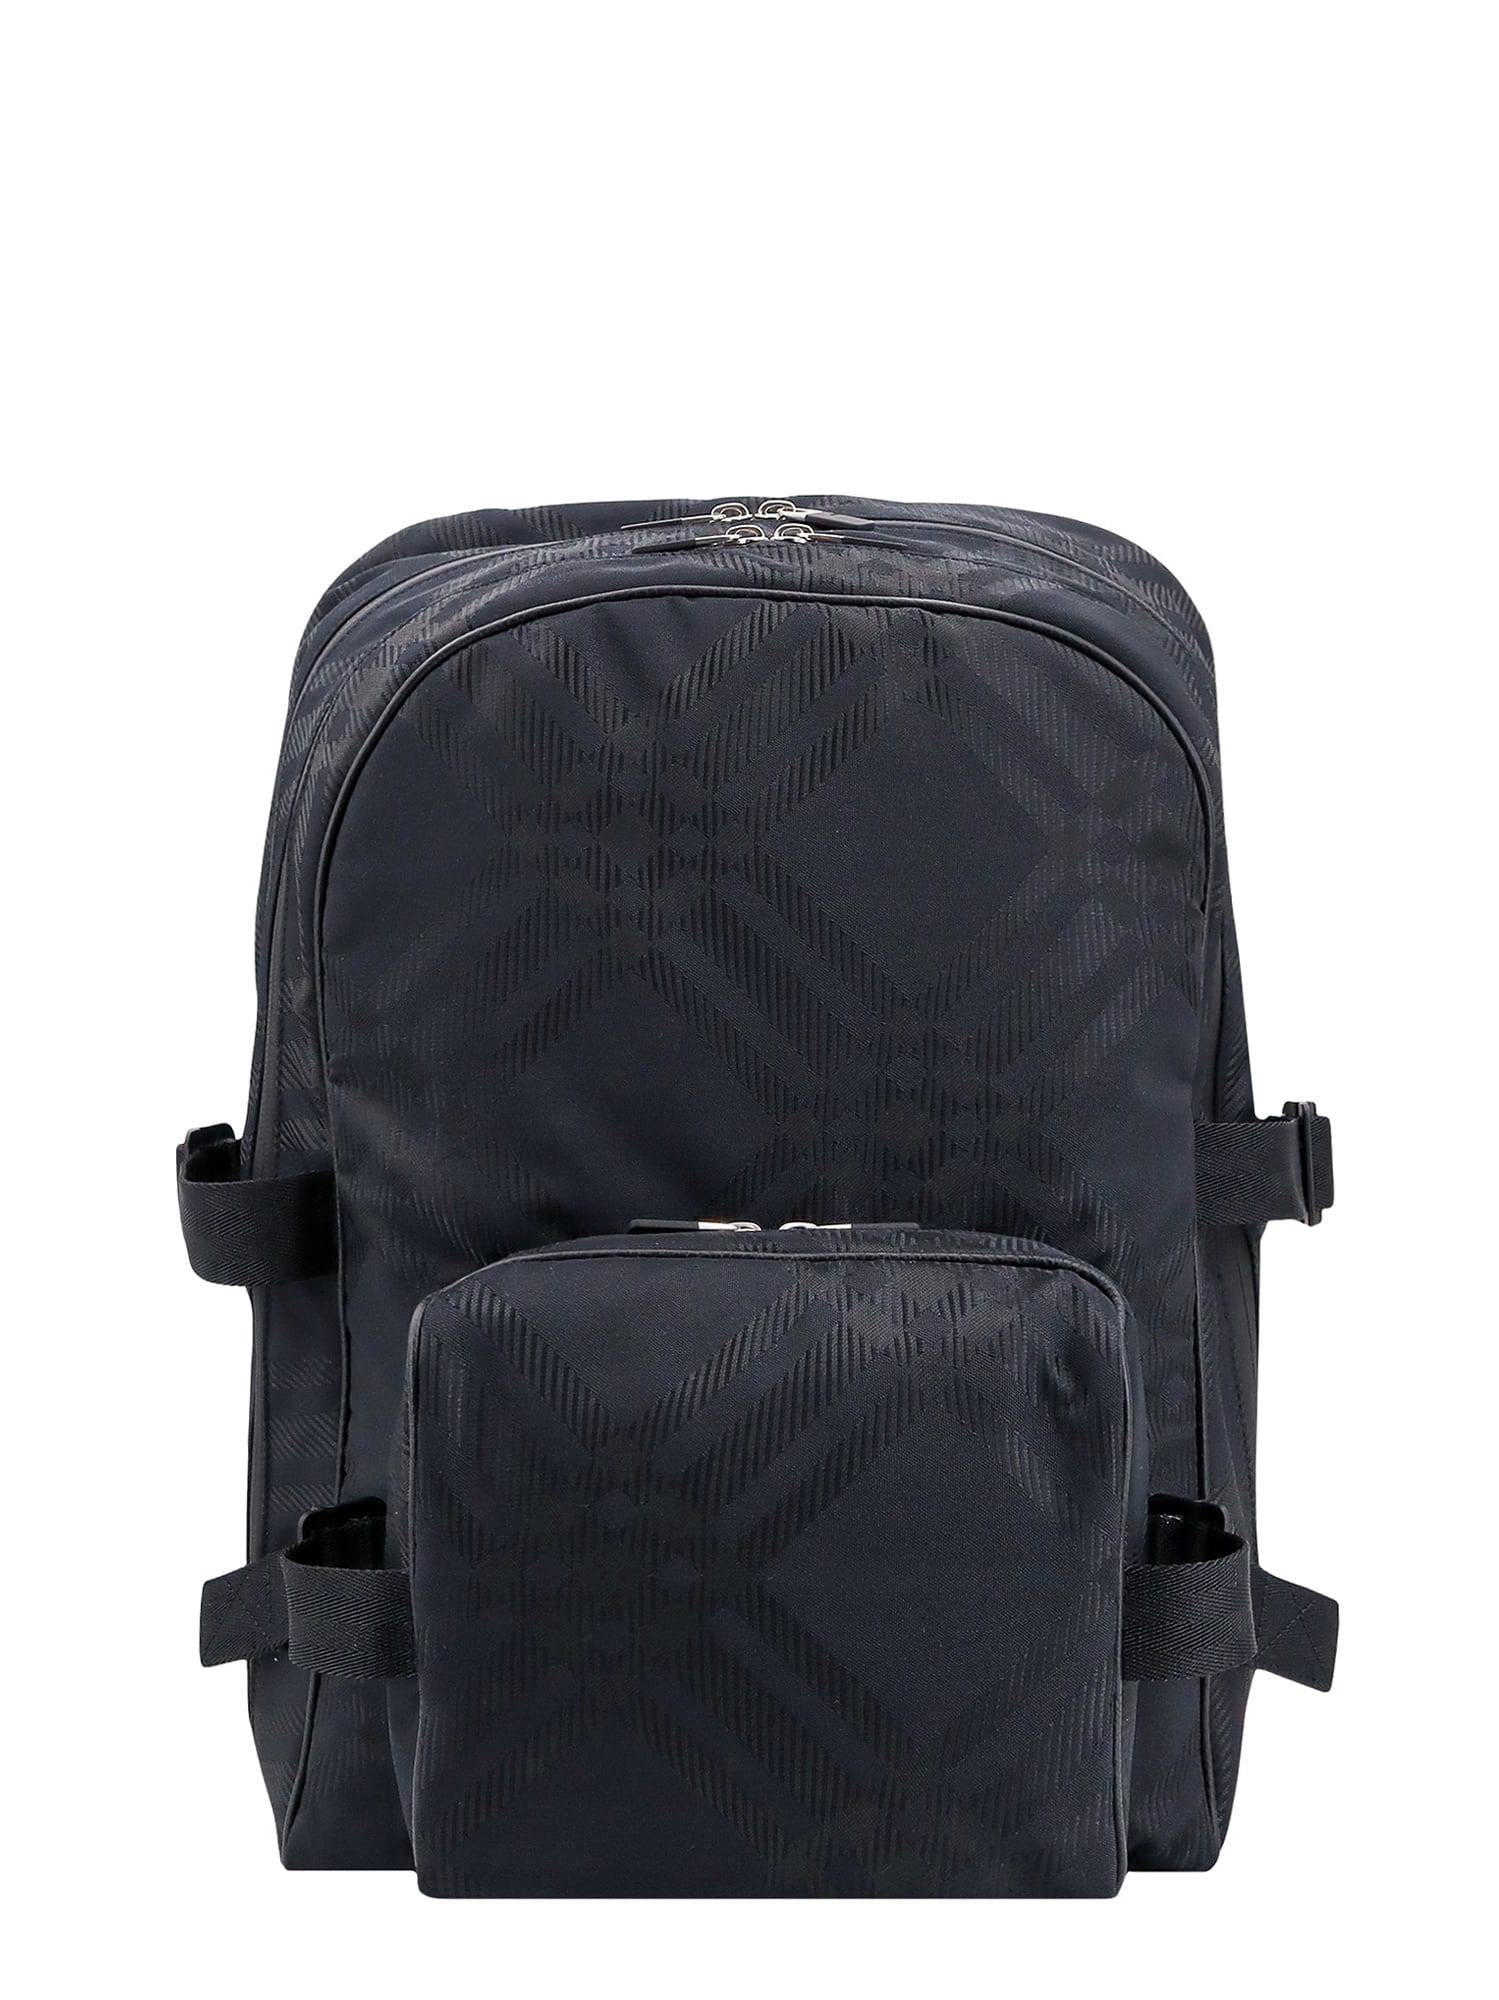 Burberry Jacquard Check Backpack In Black